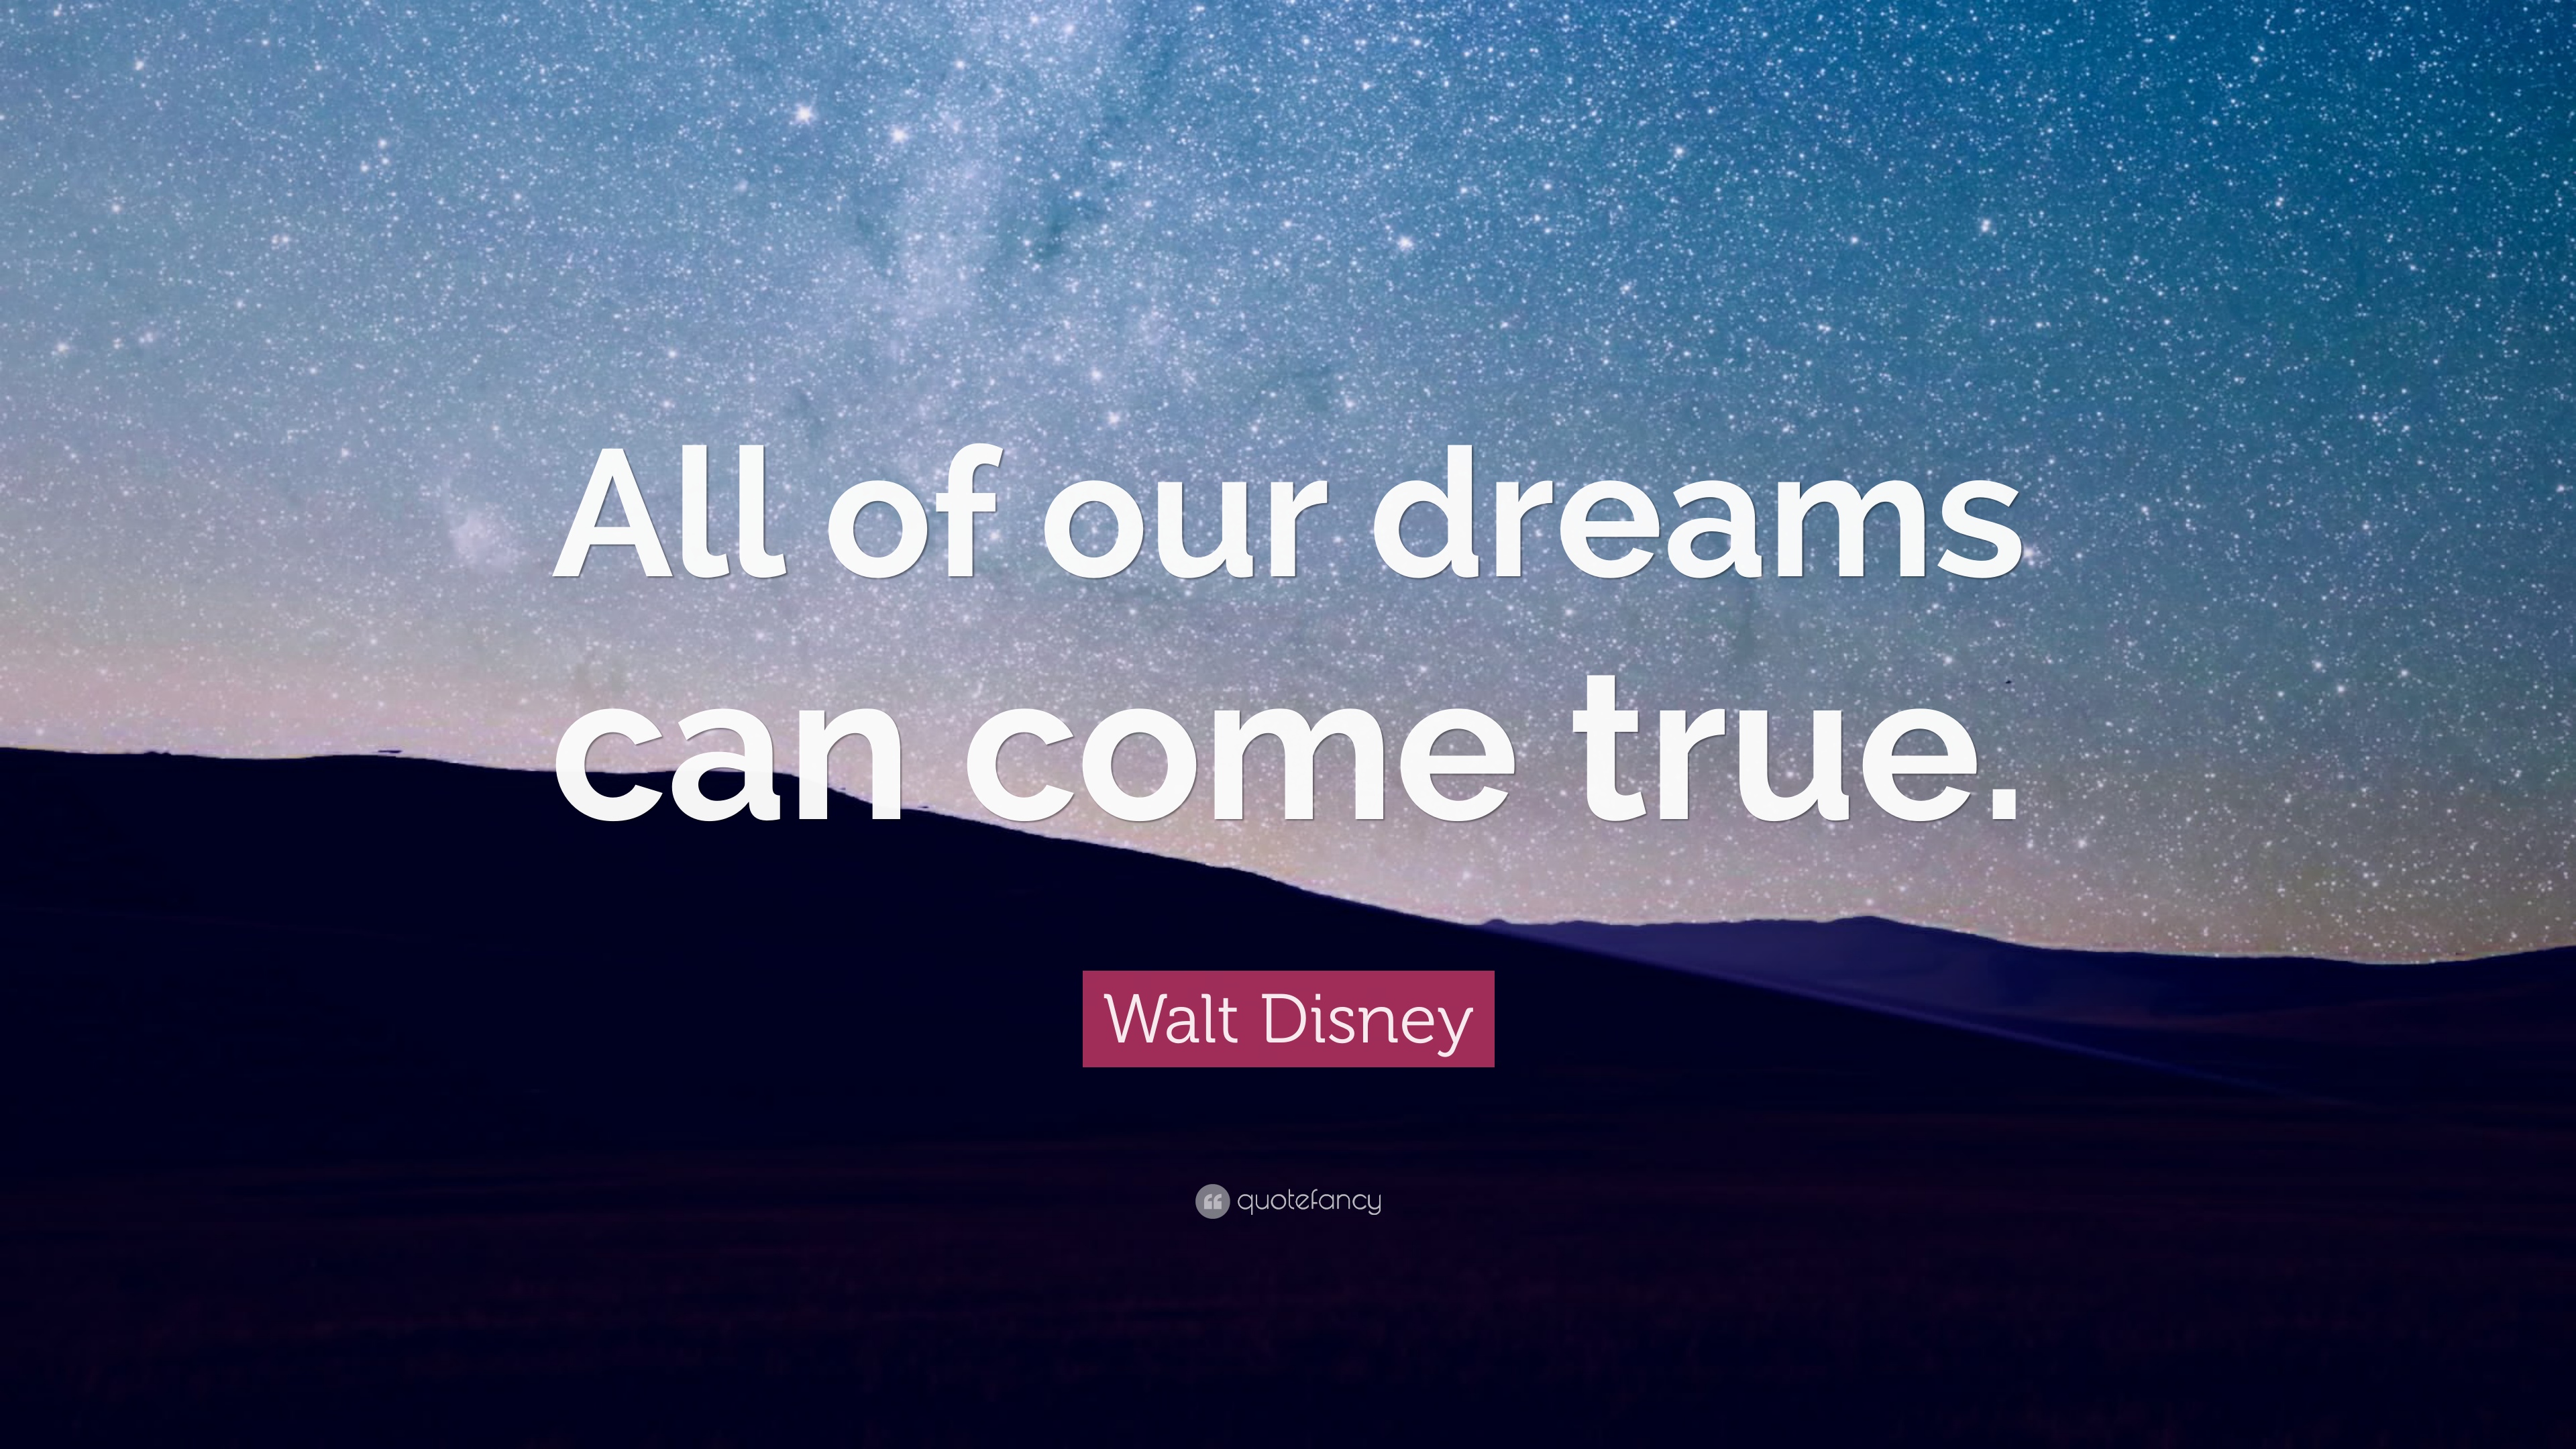 Walt Disney Quote: “All of our dreams can come true.”